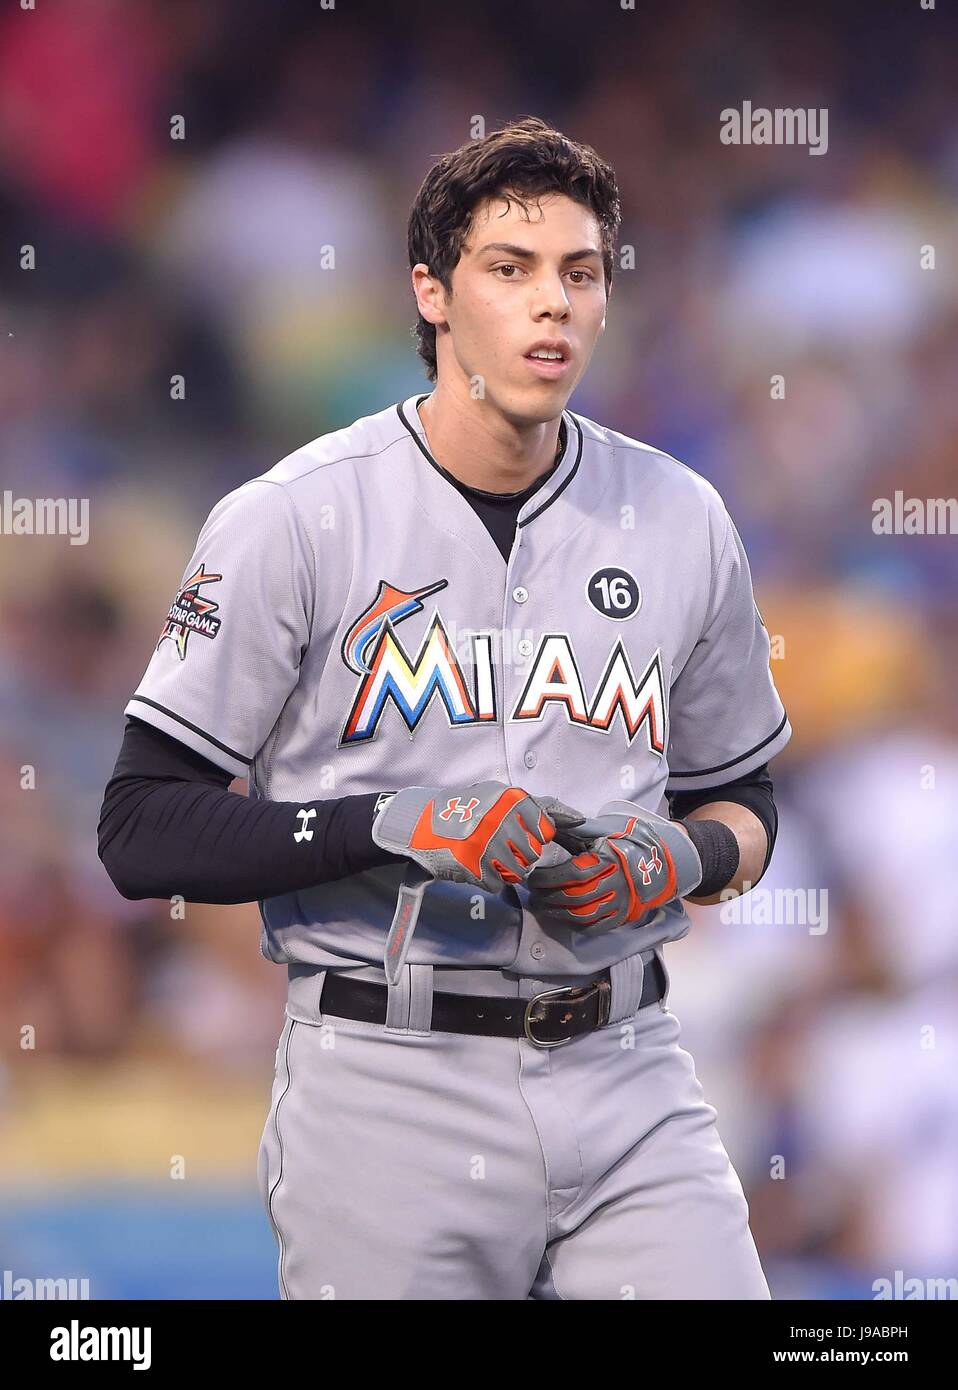 Los Angeles, California, USA. 20th May, 2017. Christian Yelich (Marlins)  MLB : Christian Yelich of the Miami Marlins during the Major League Baseball  game against the Los Angeles Dodgers at Dodger Stadium